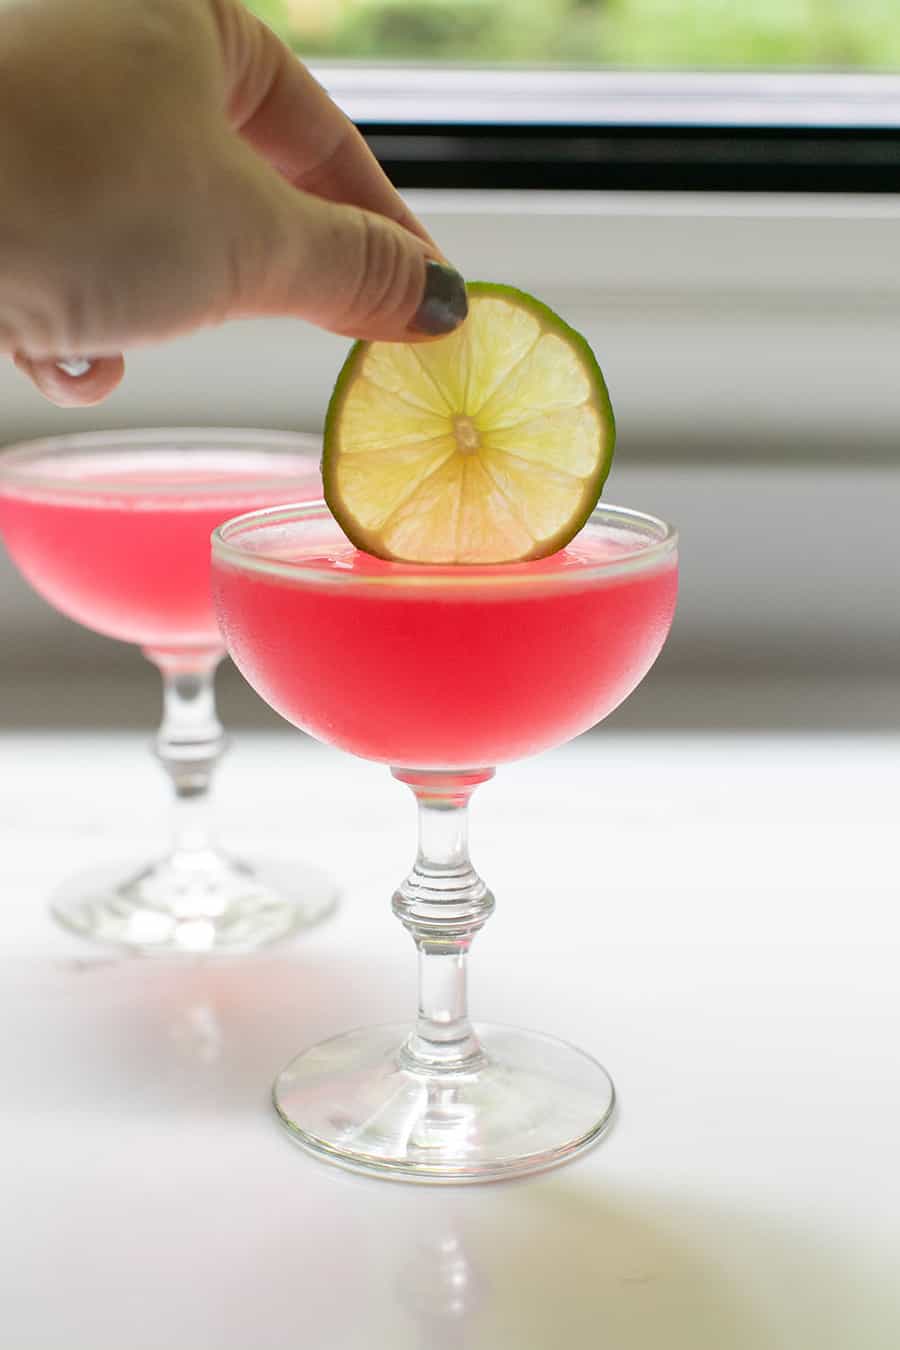 Adding a lime wedge into a pink cosmopolitan cocktail recipe.